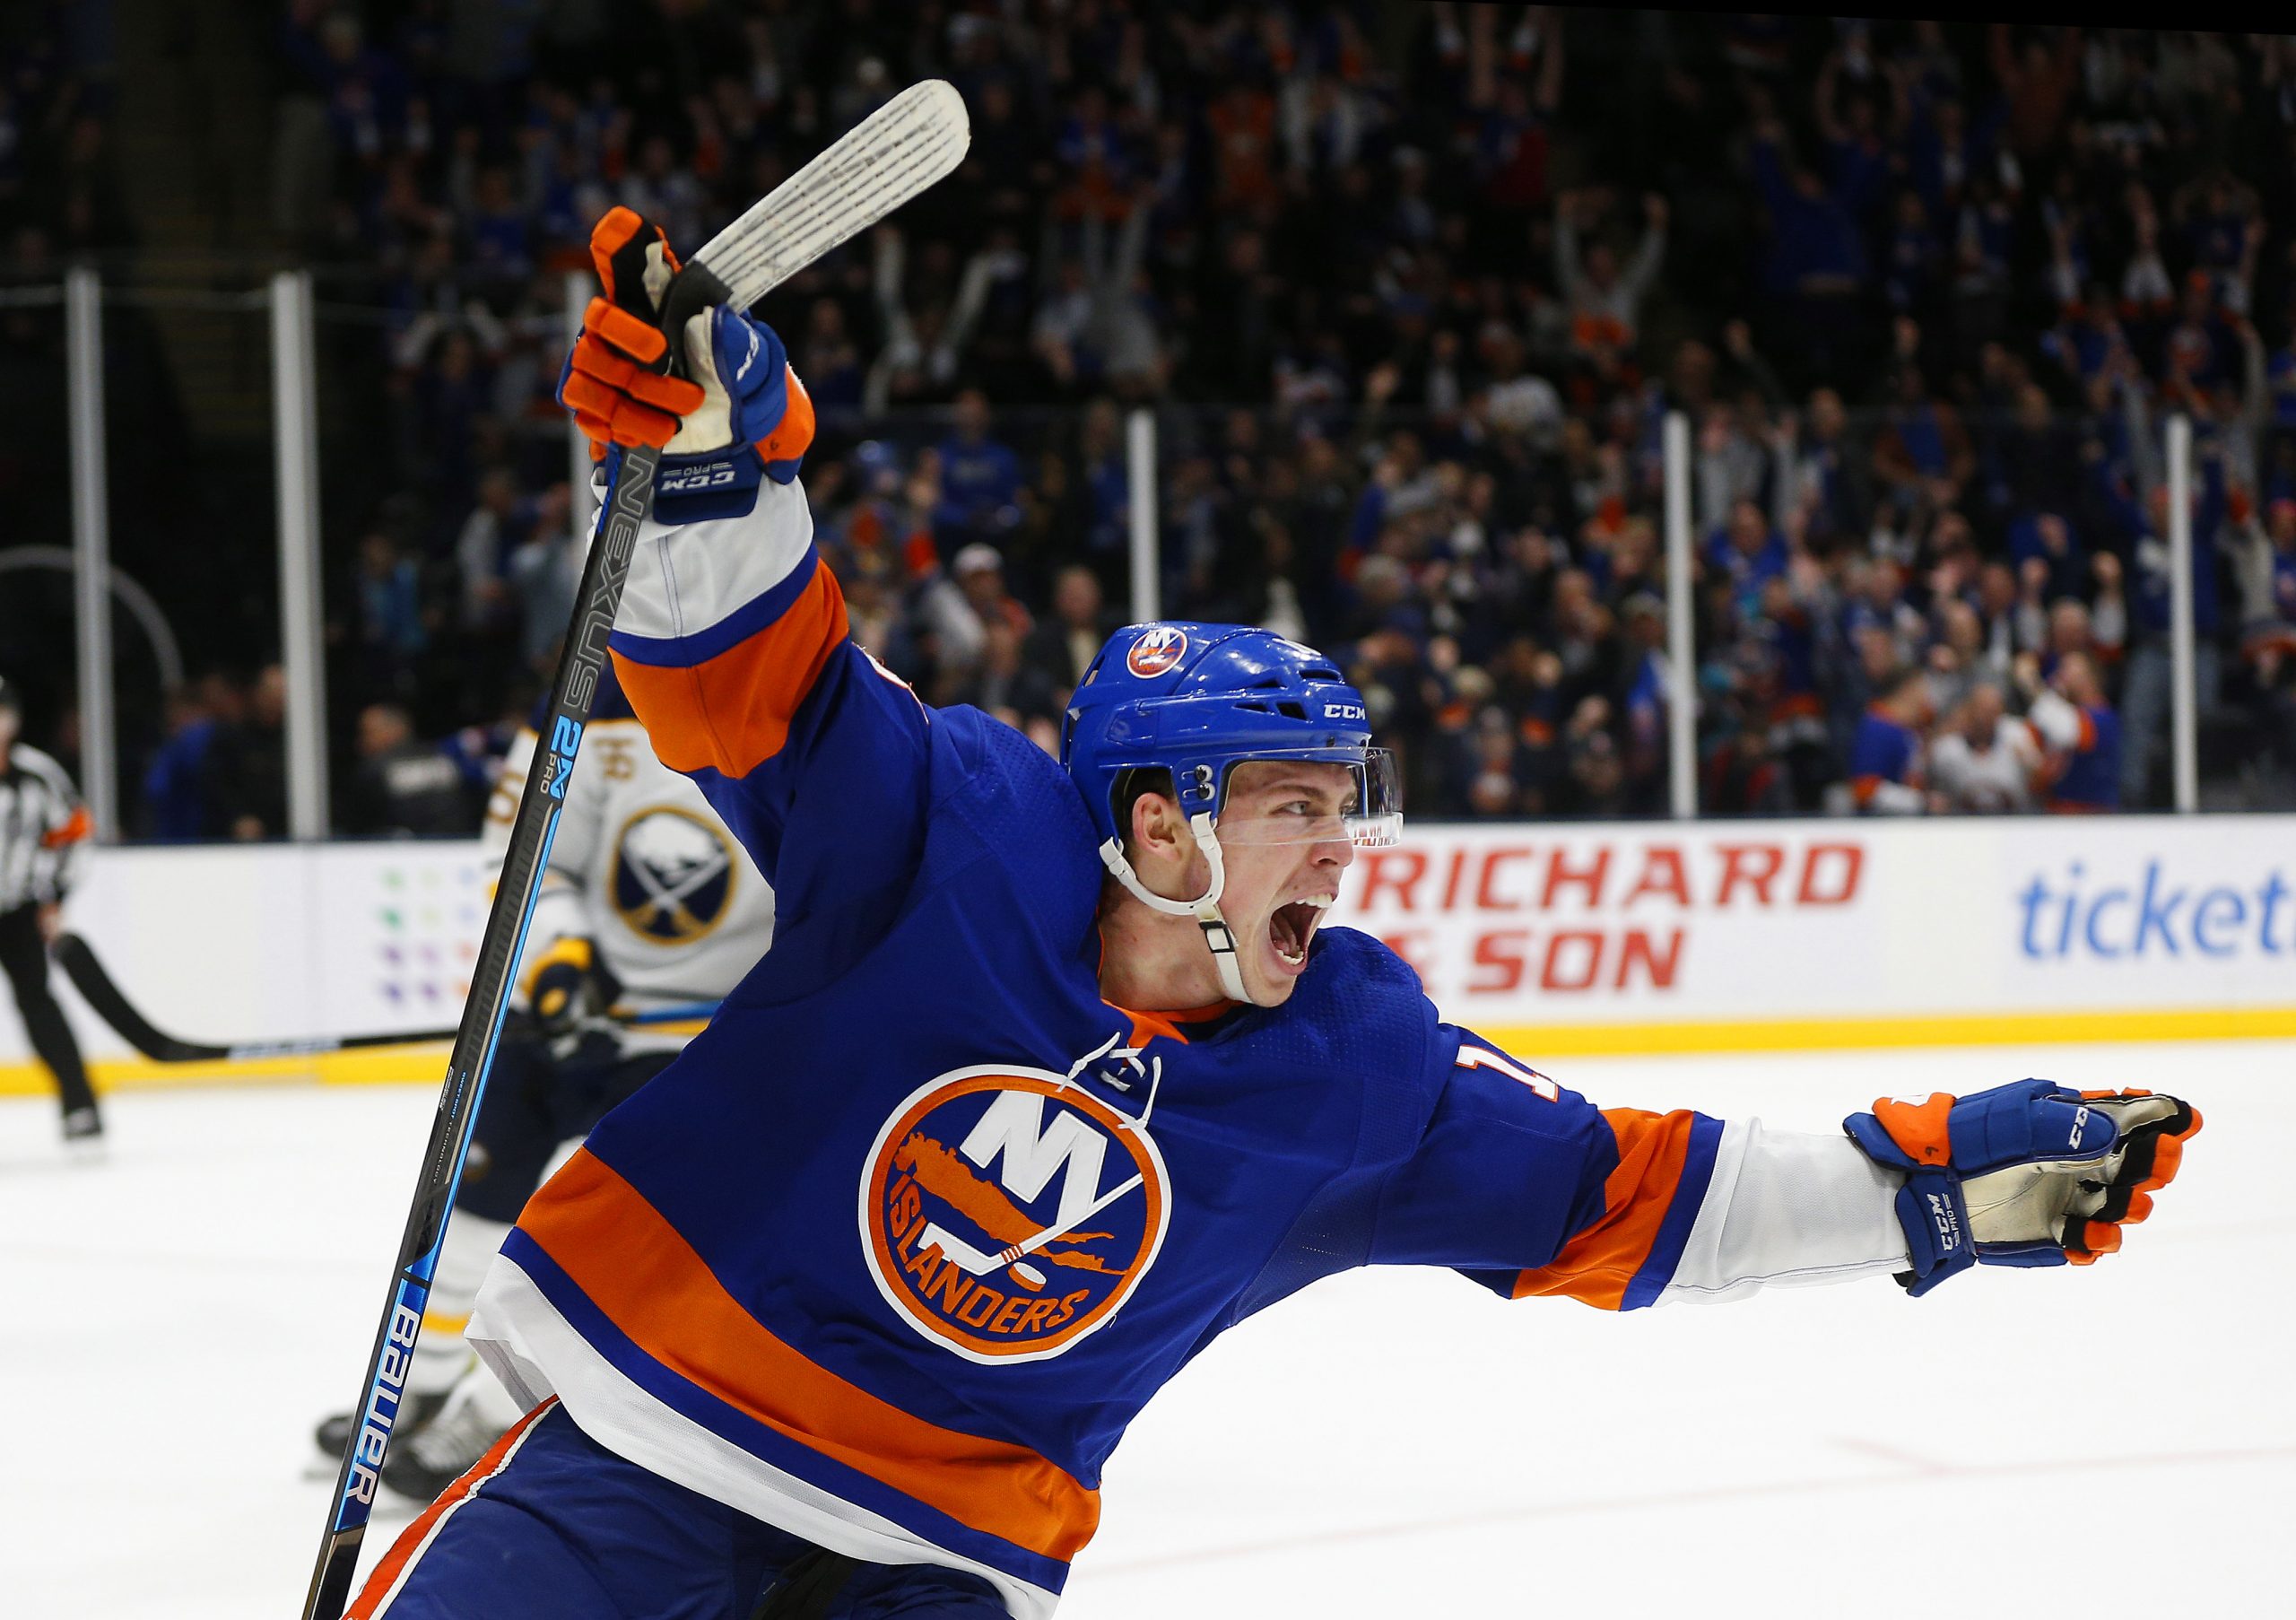 Dec 14, 2019; Uniondale, NY, USA; New York Islanders left wing Anthony Beauvillier (18) celebrates after scoring the game winning goal against the Buffalo Sabres during overtime at Nassau Veterans Memorial Coliseum. Mandatory Credit: Andy Marlin-USA TODAY Sports